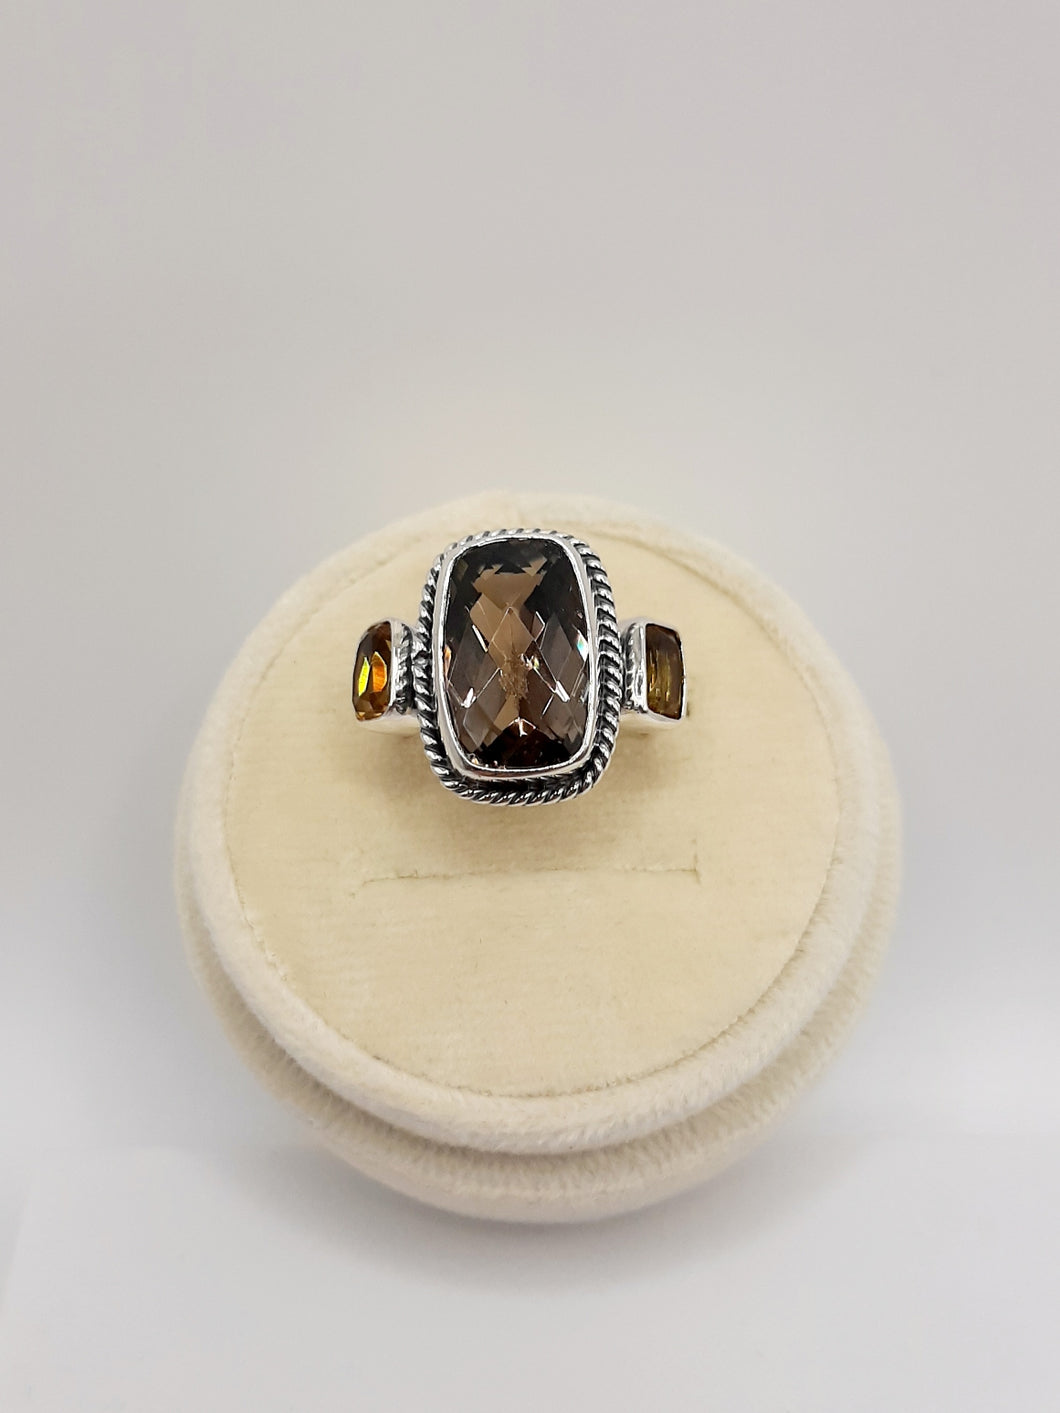 Bali Oxidized Sterling Silver Ring Featuring A  Rectangular Faceted Smokey Topaz